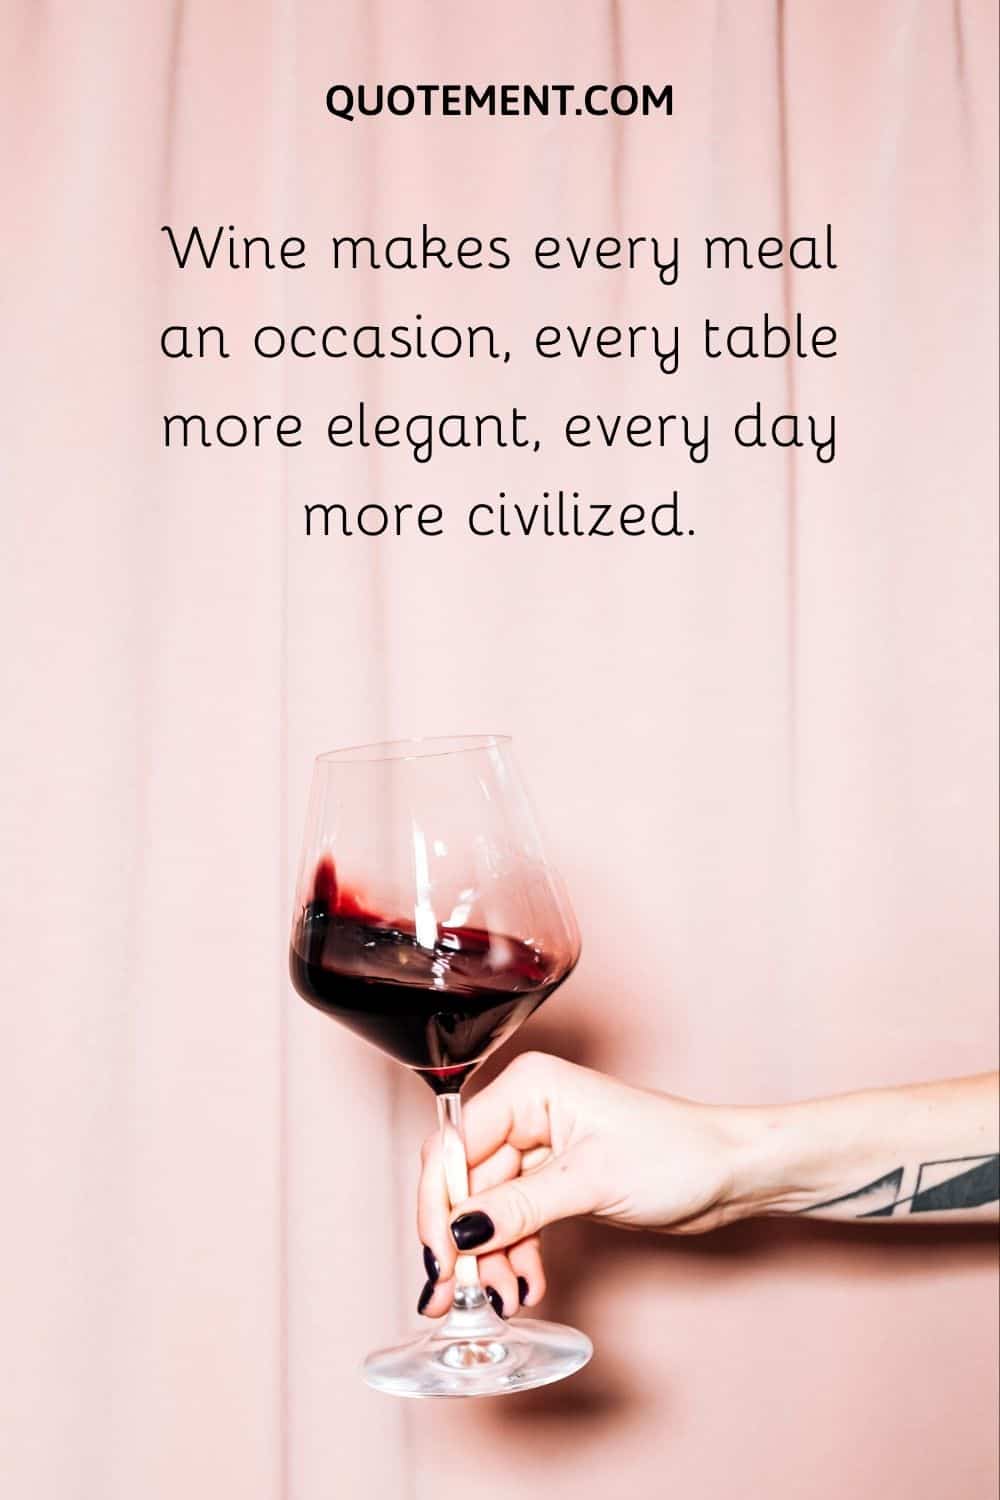 Wine makes every meal an occasion